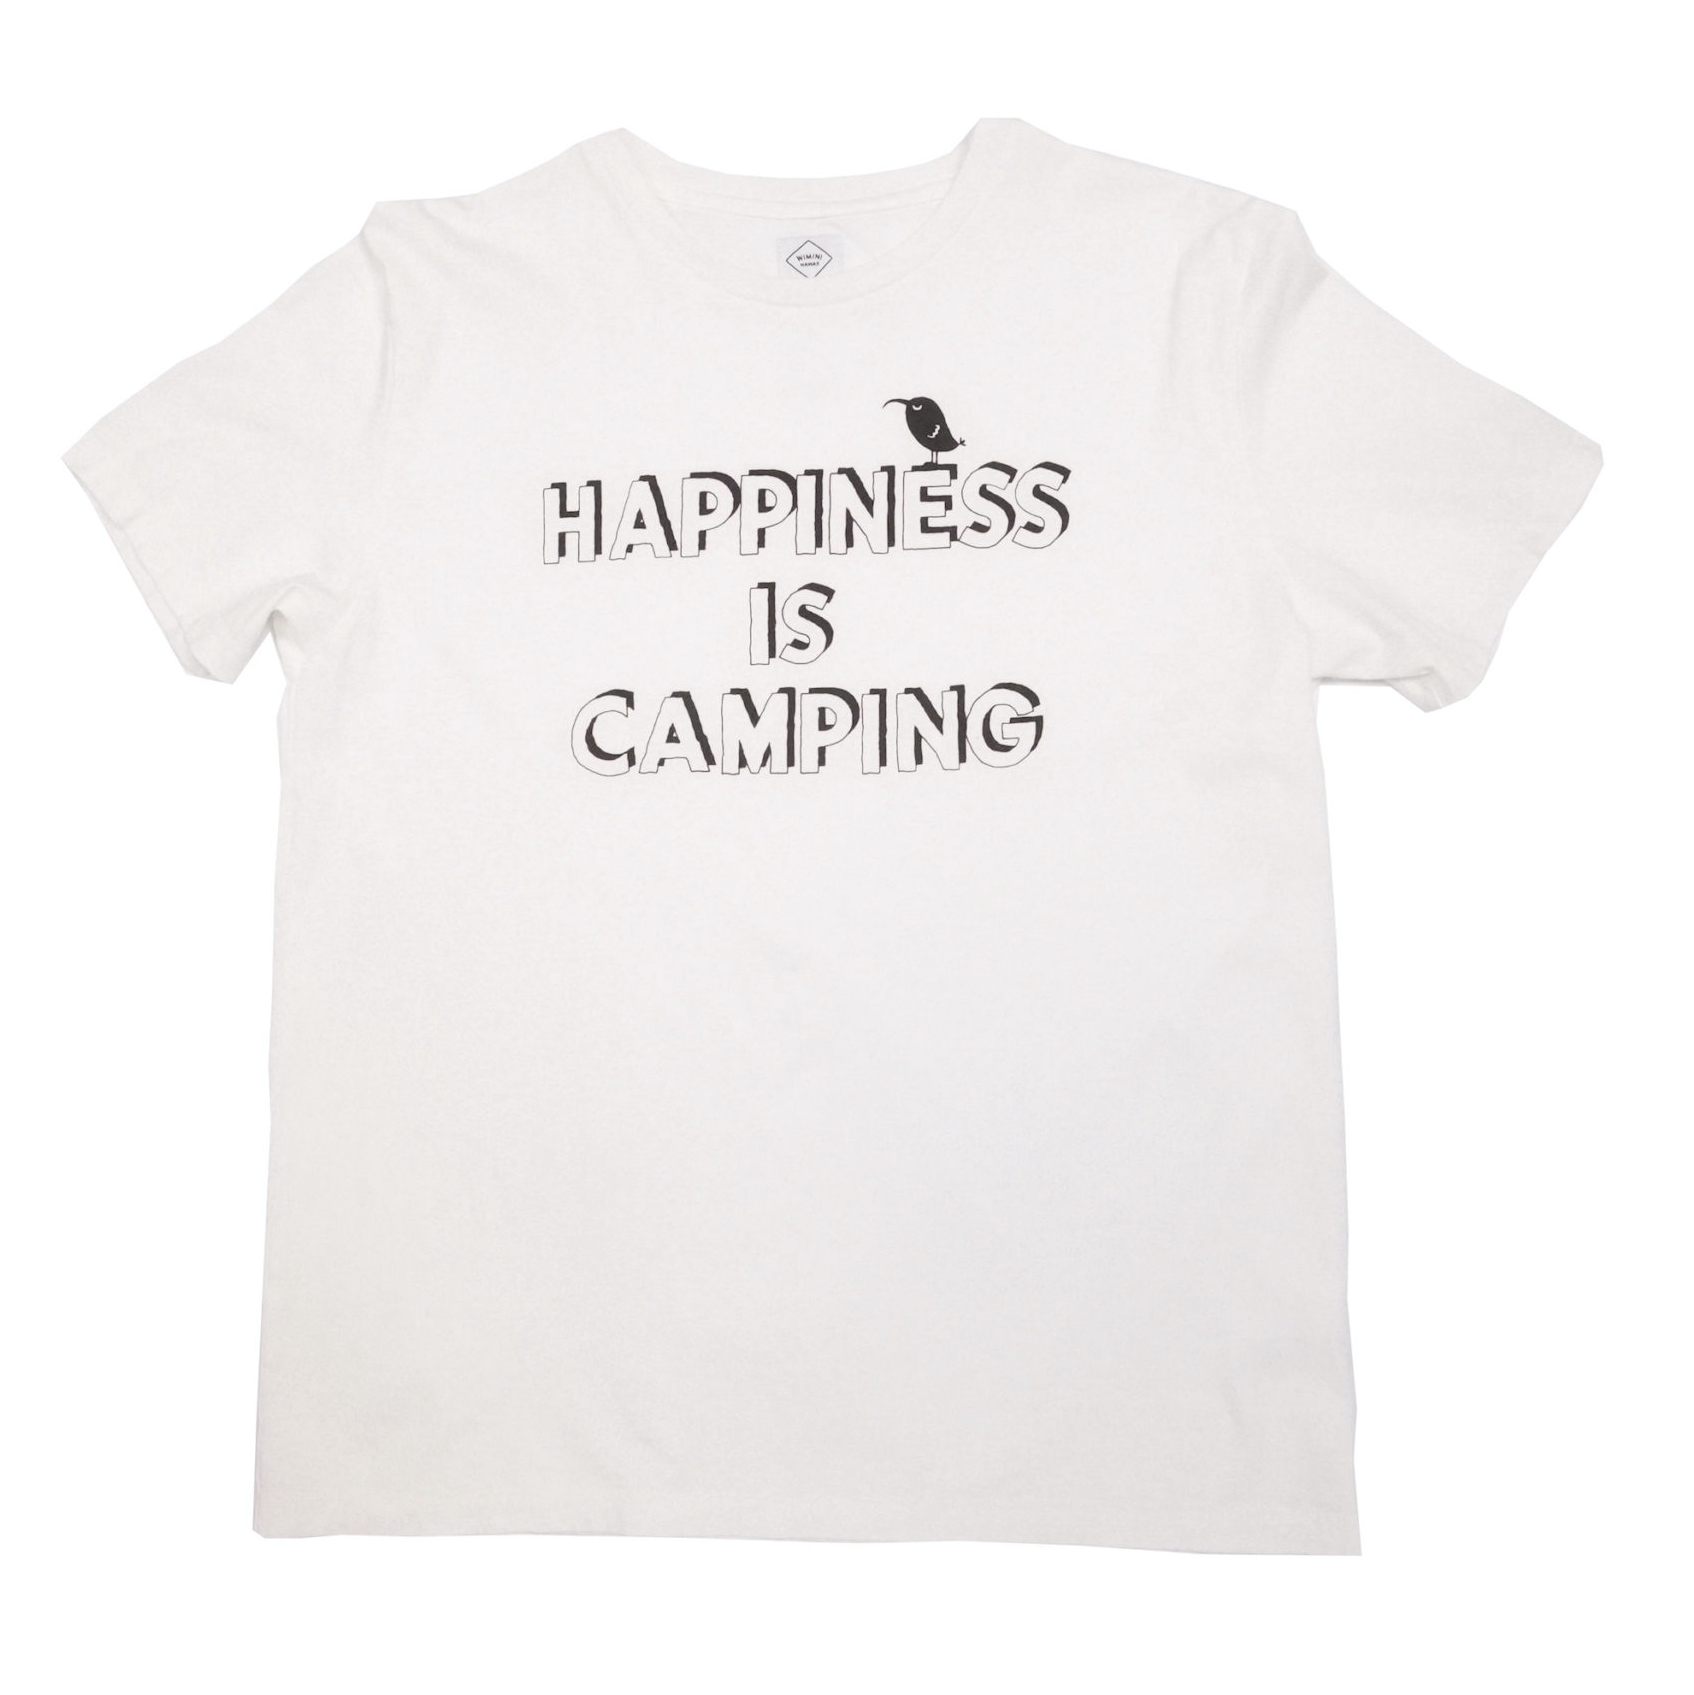 CAMP MANIA PRODUCTS × WIMINI HAWAII / “HAPPINESS IS CAMPING 